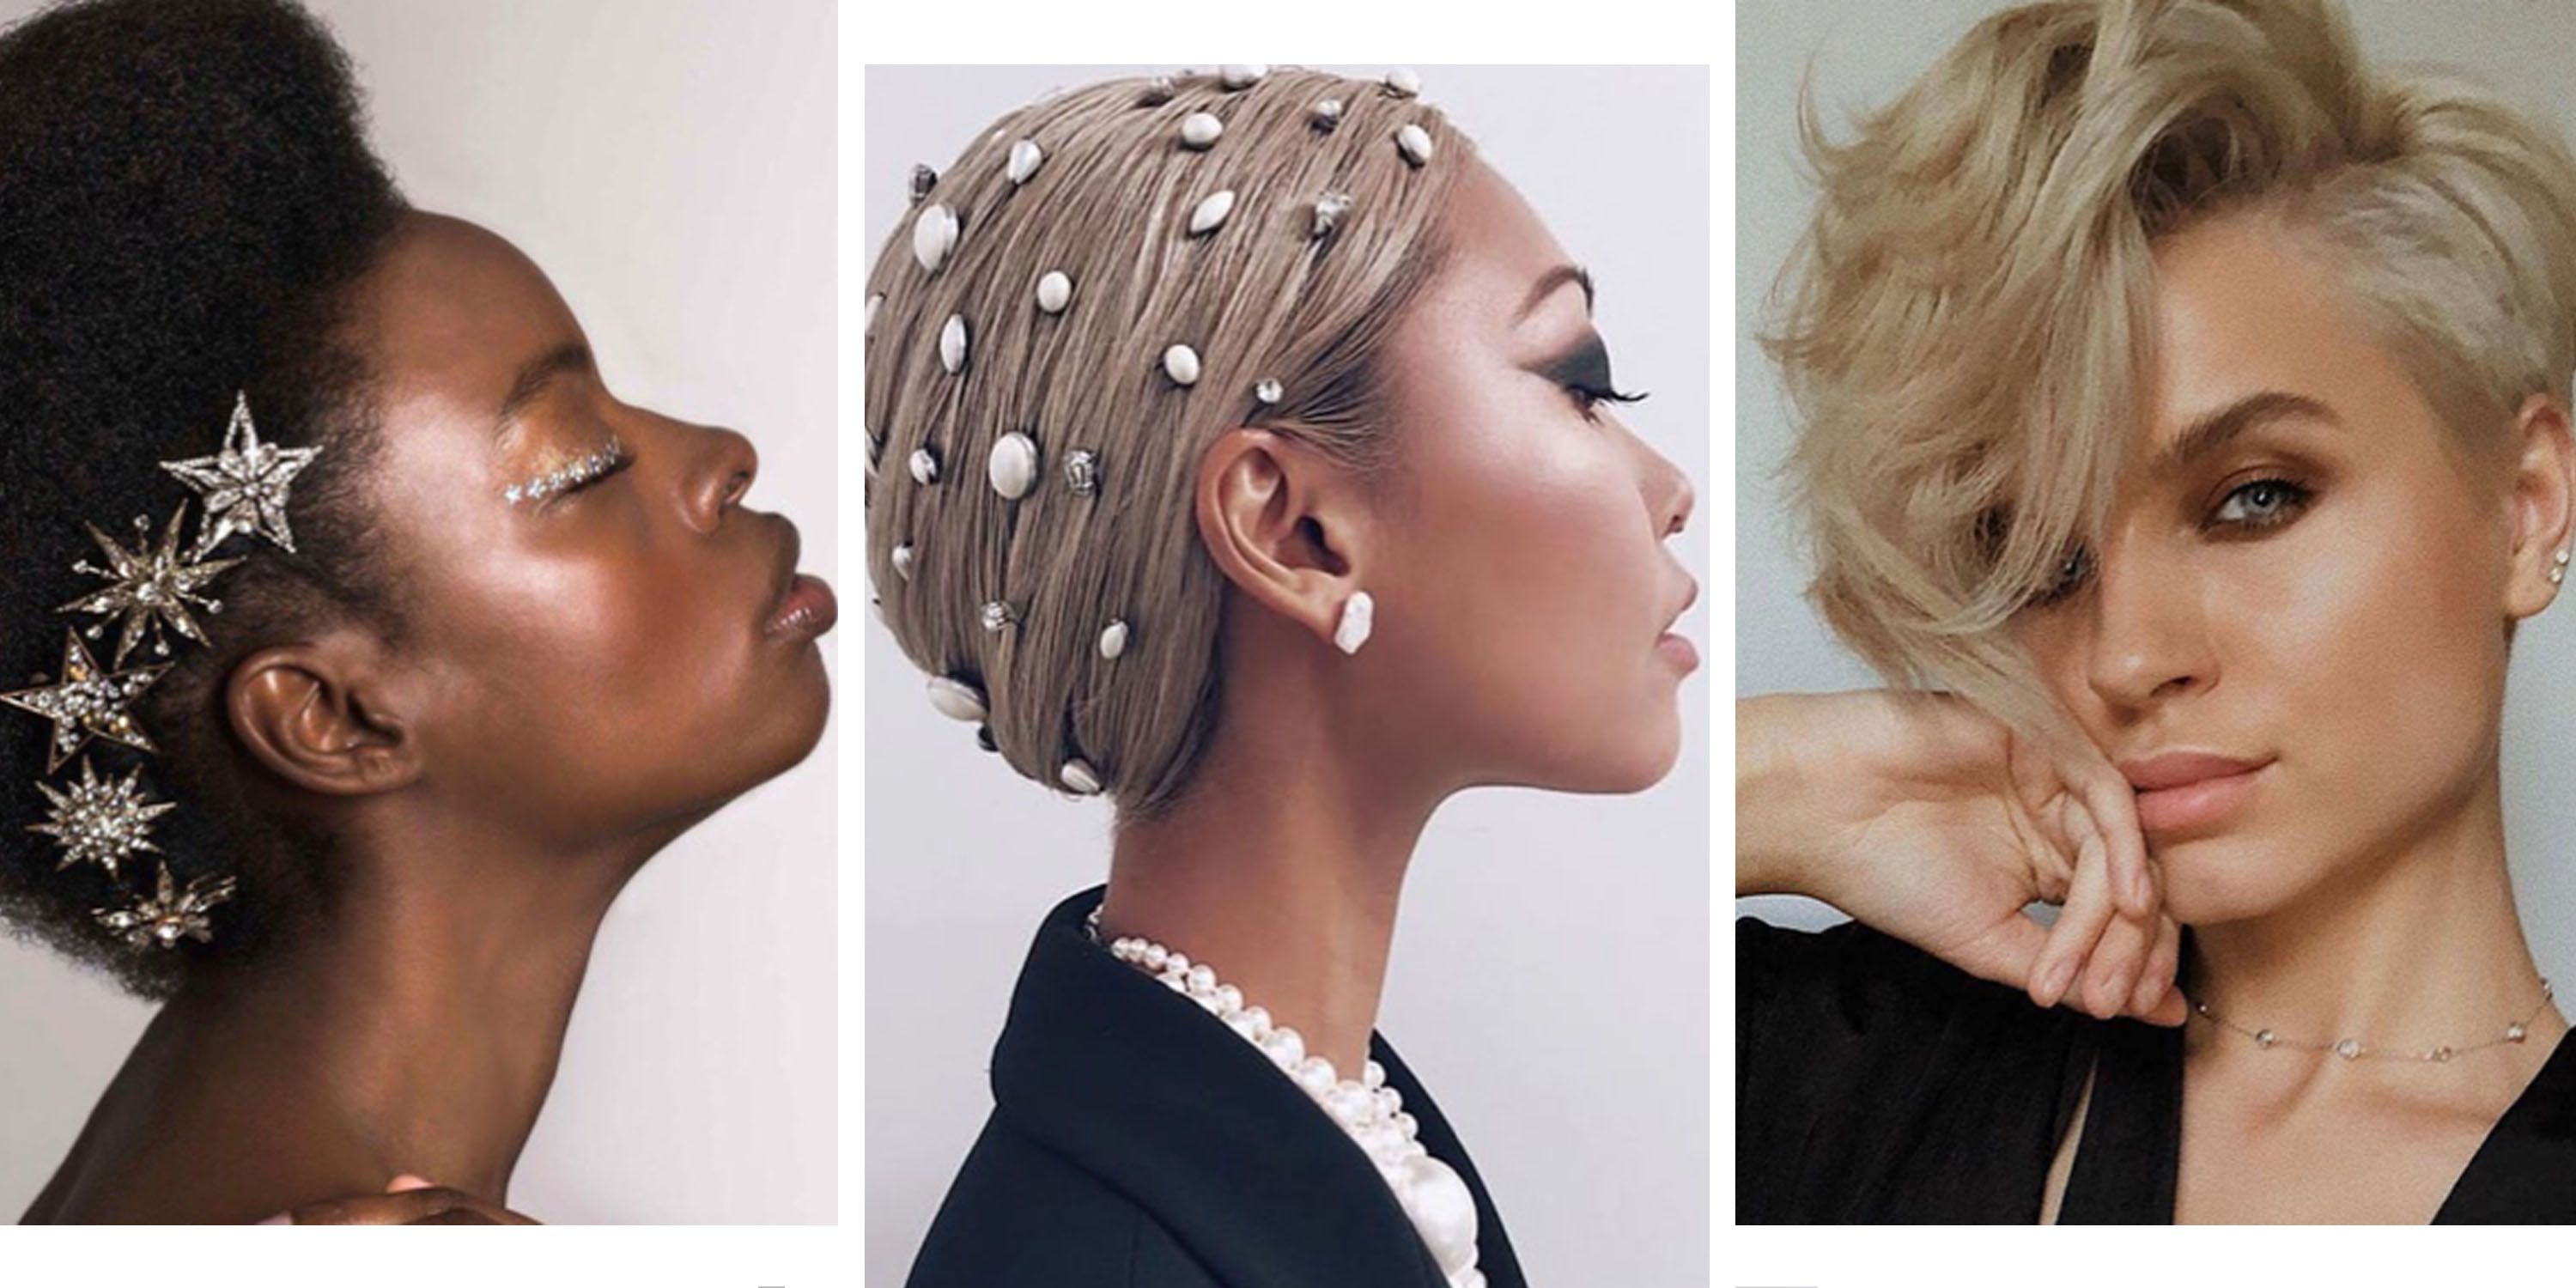 Party Hairstyles - 19 Hairstyles That Scream Party Season